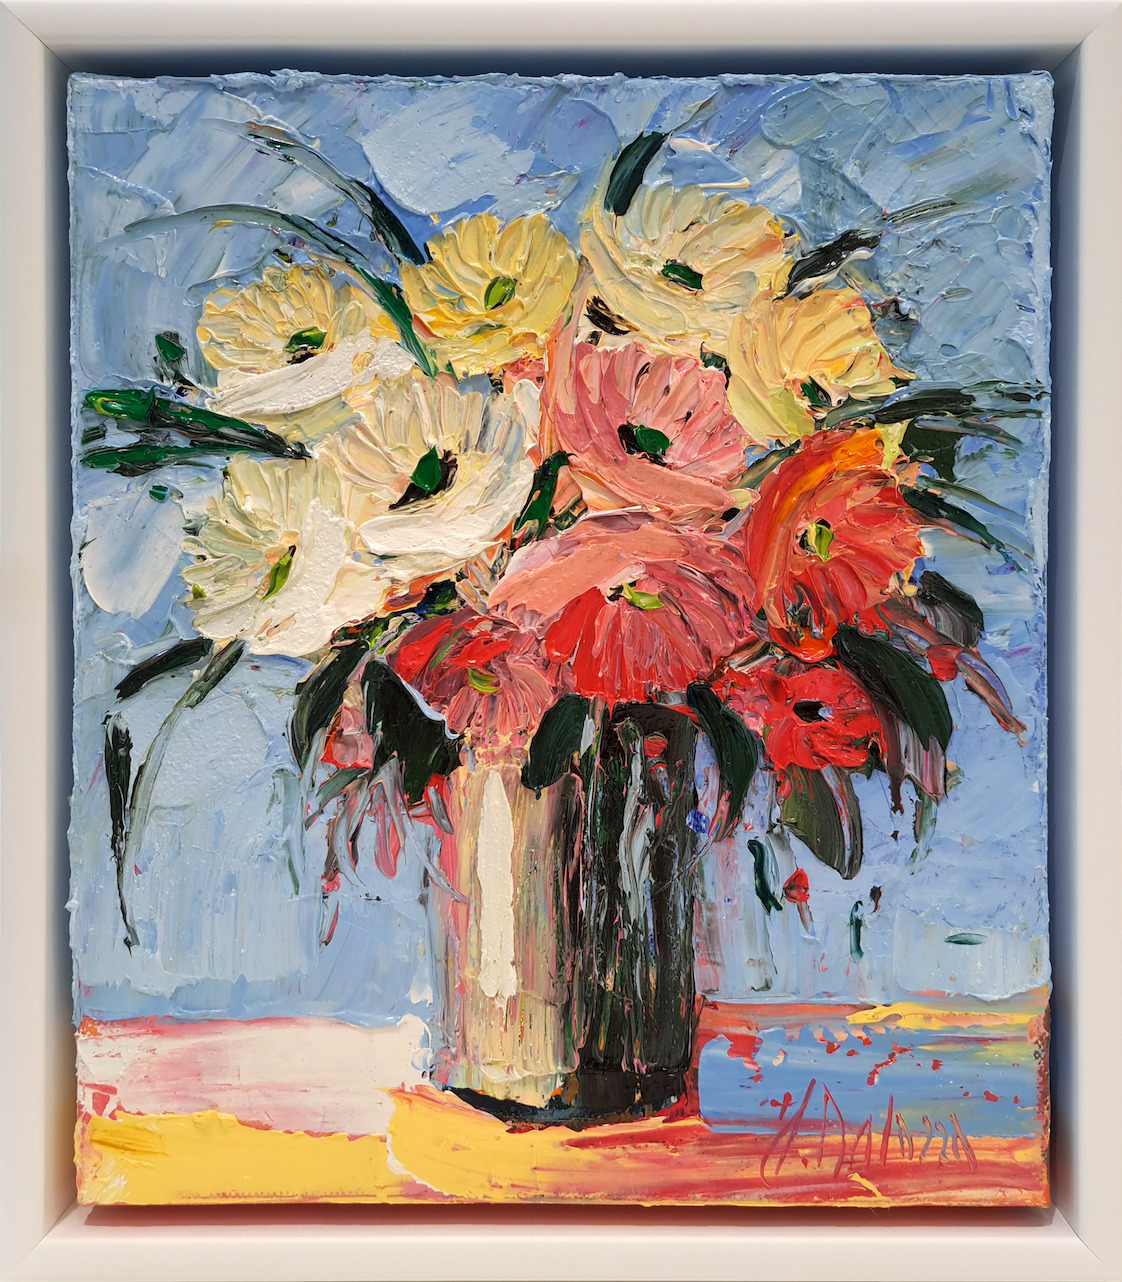 Framed Front View Of Still Life Painting "Moonlight Bouquet" By Judith Dalozzo